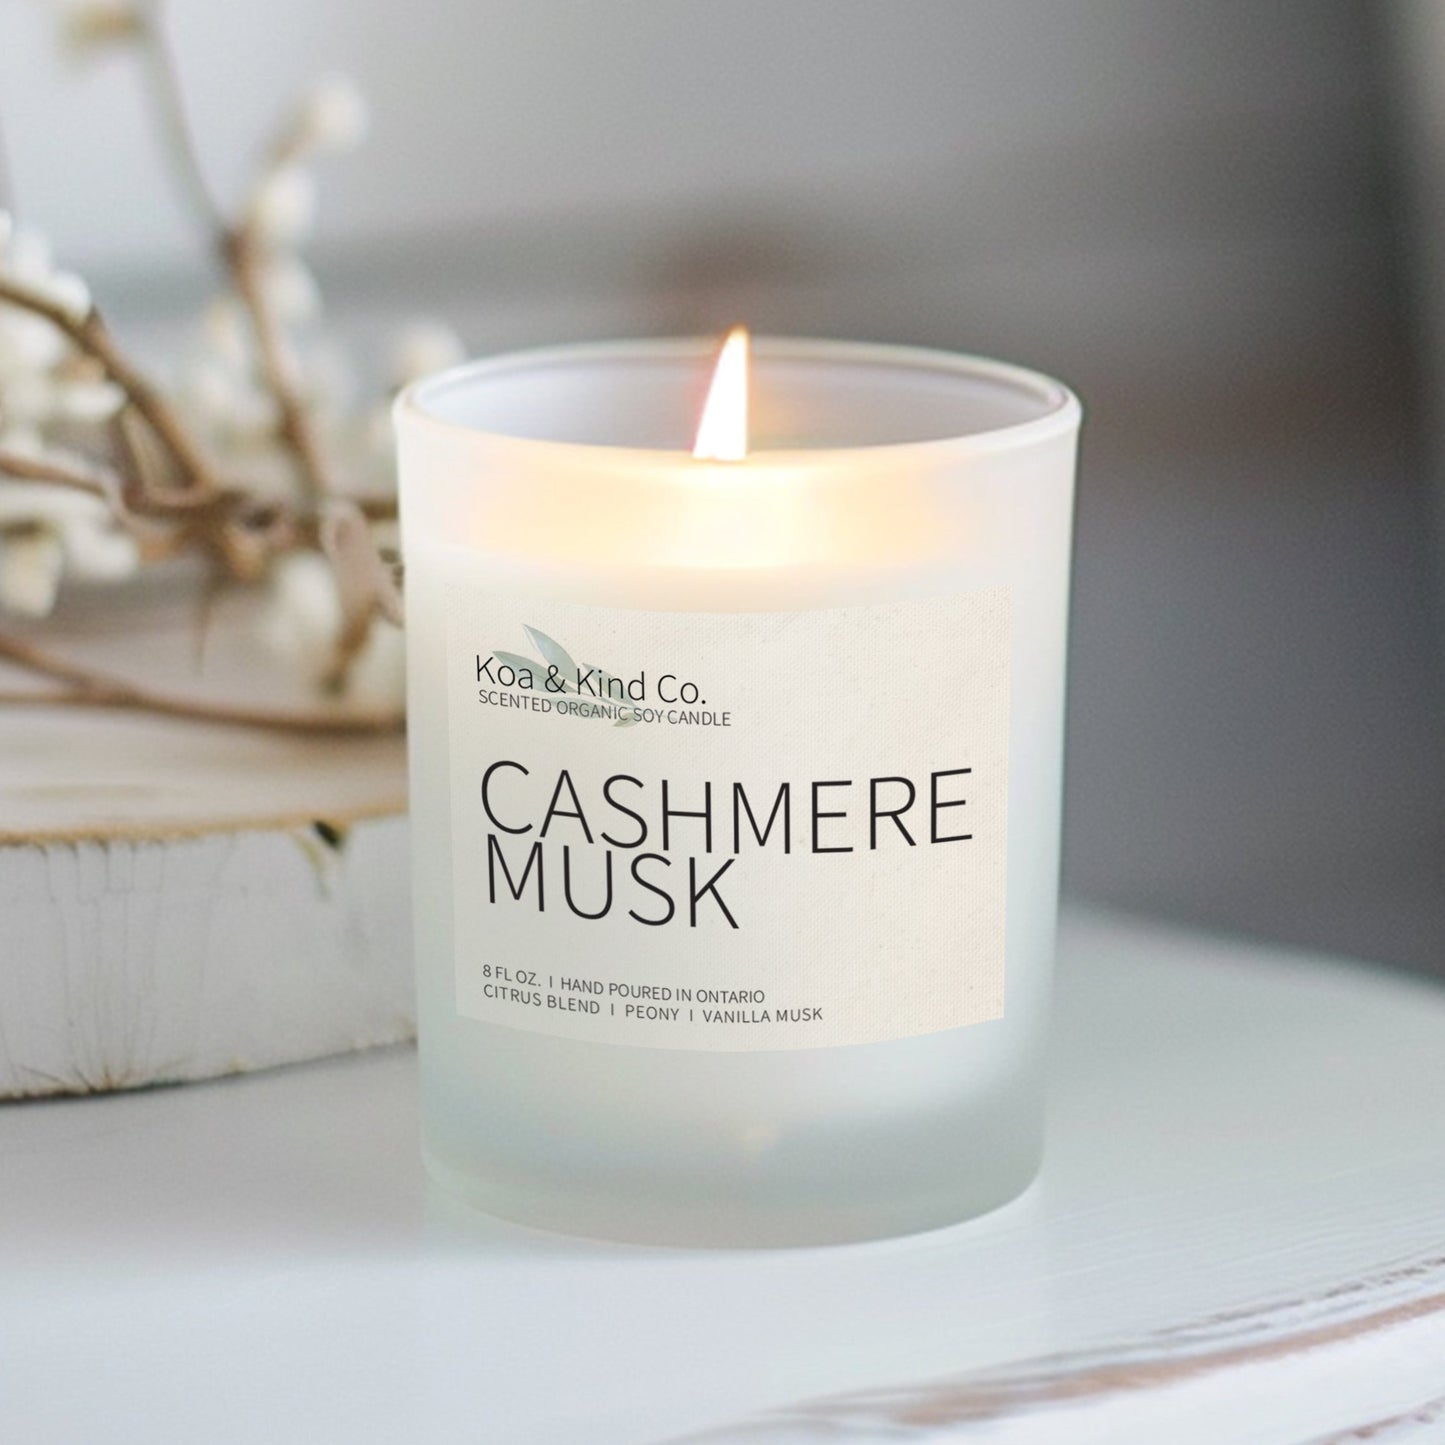 Cashmere Musk Scented Soy Candle